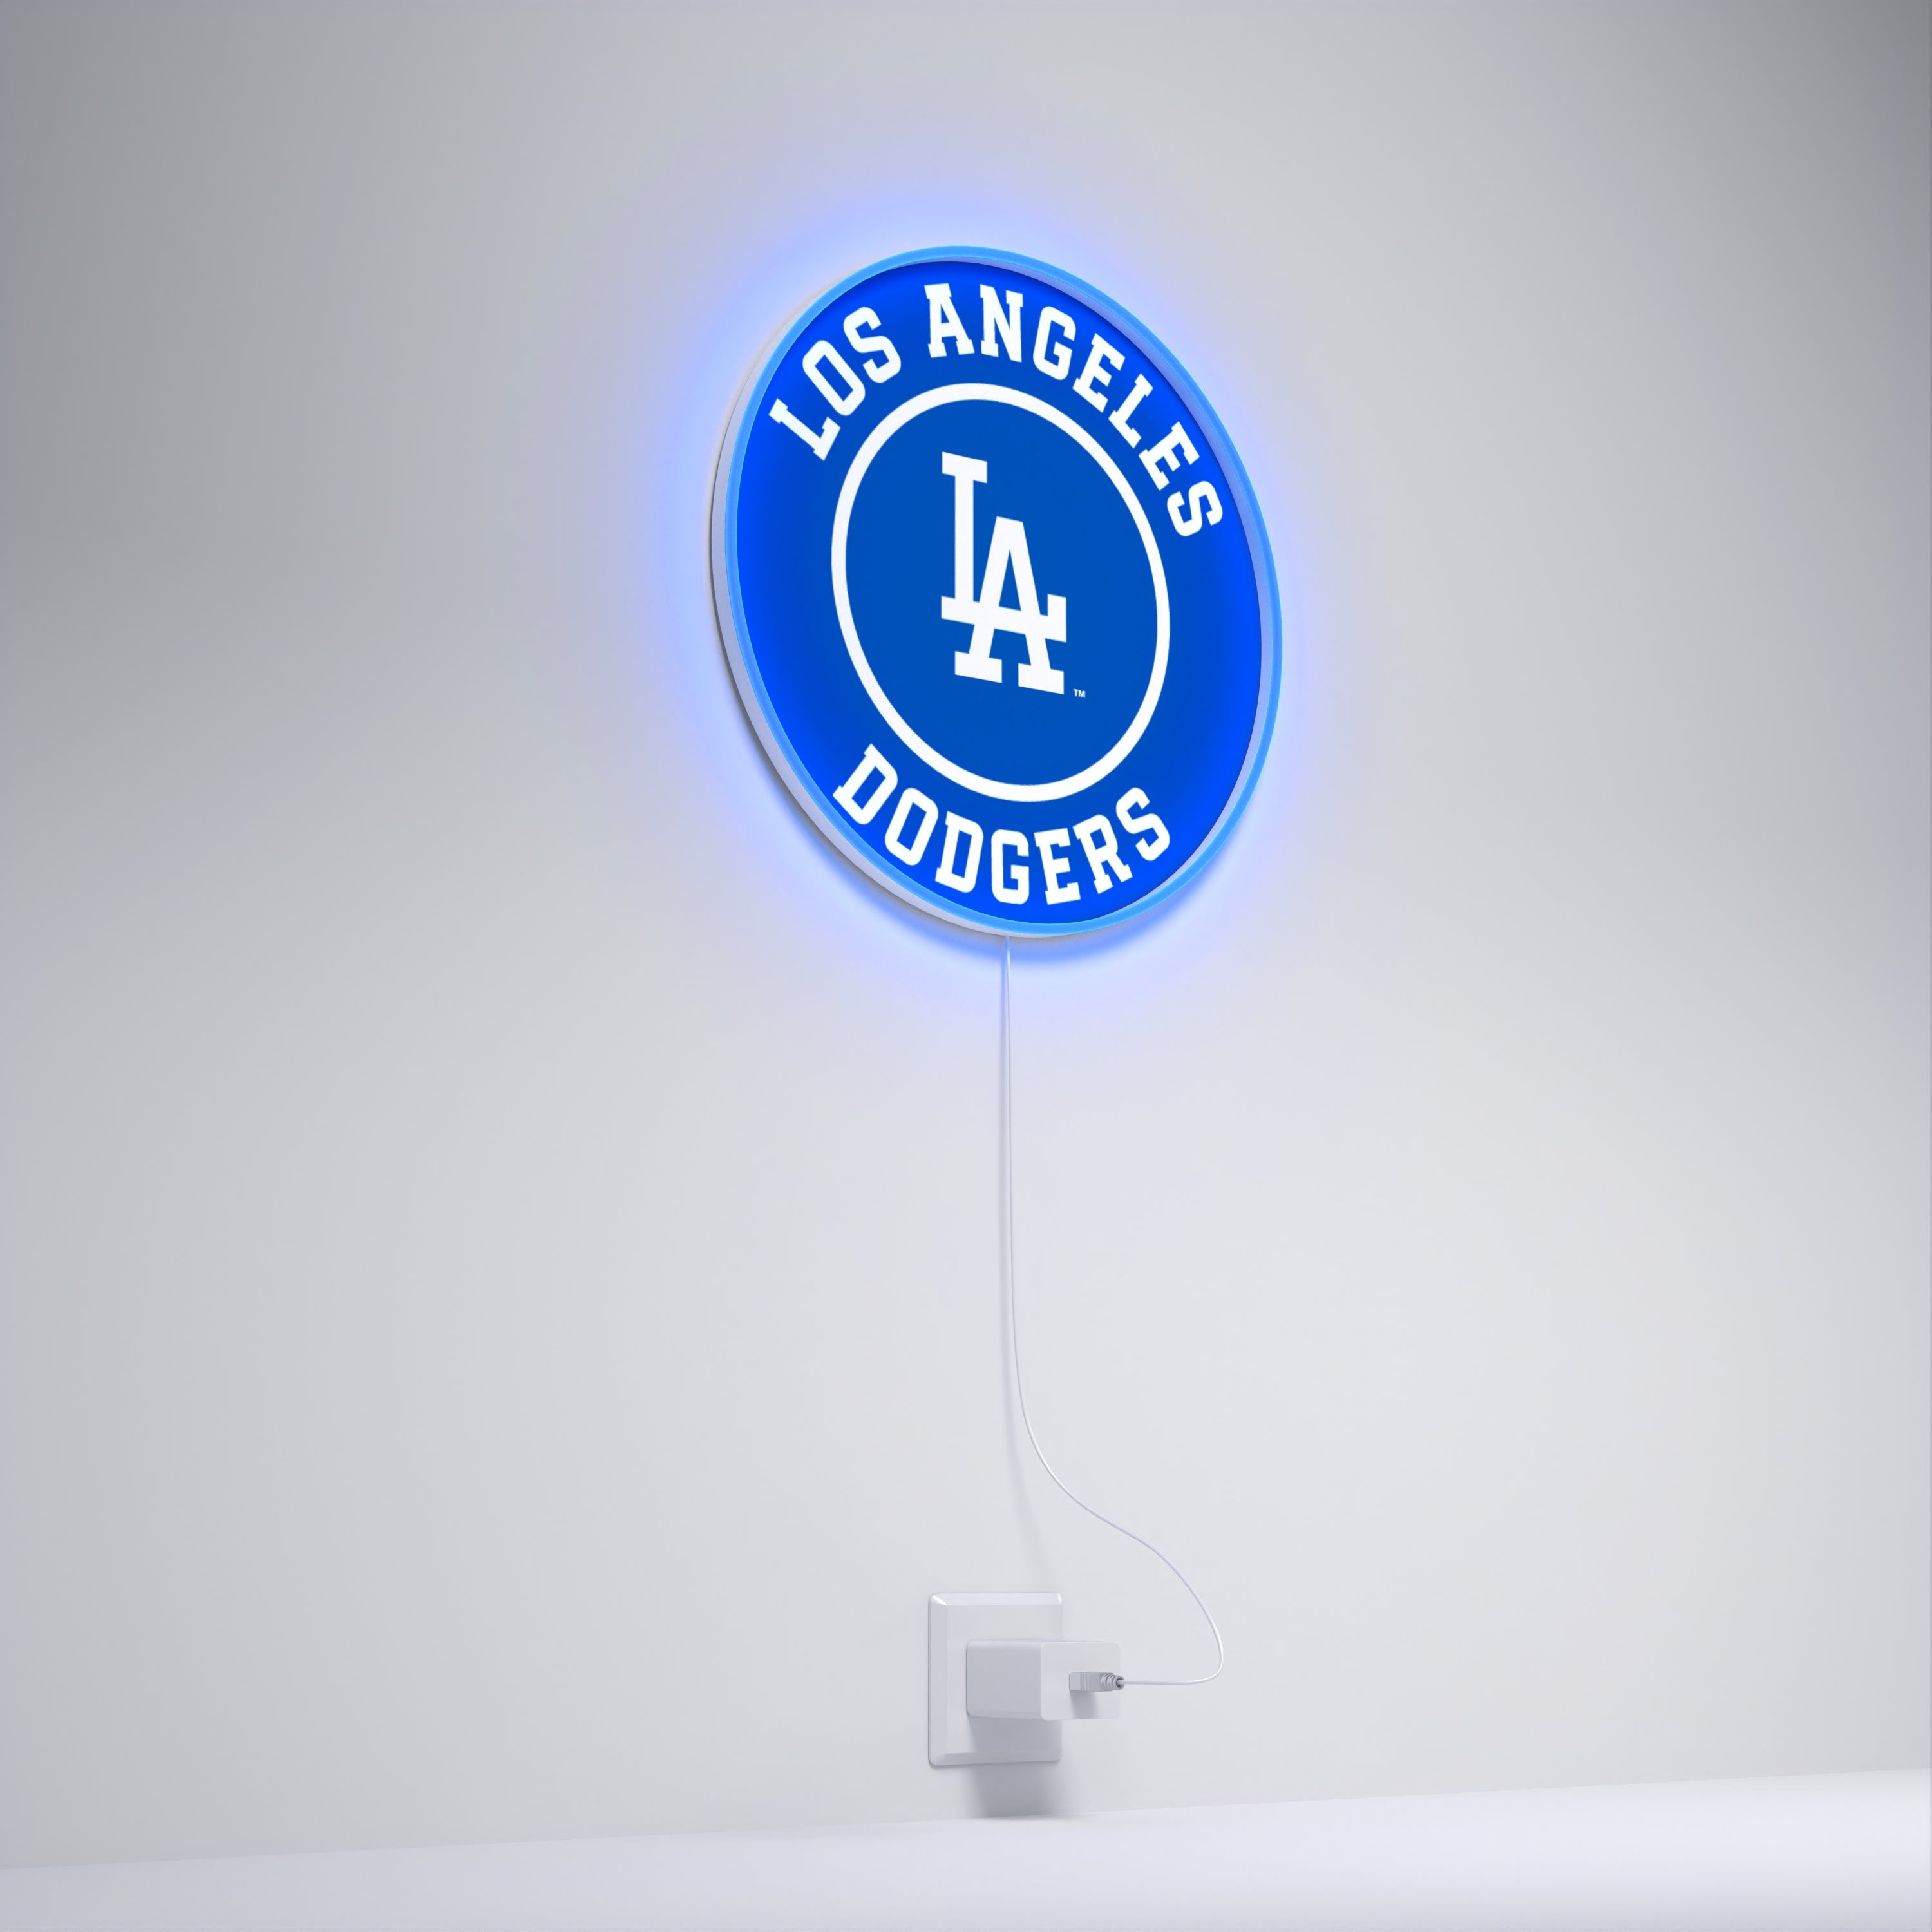 Los Angeles Dodgers Rounded Logo